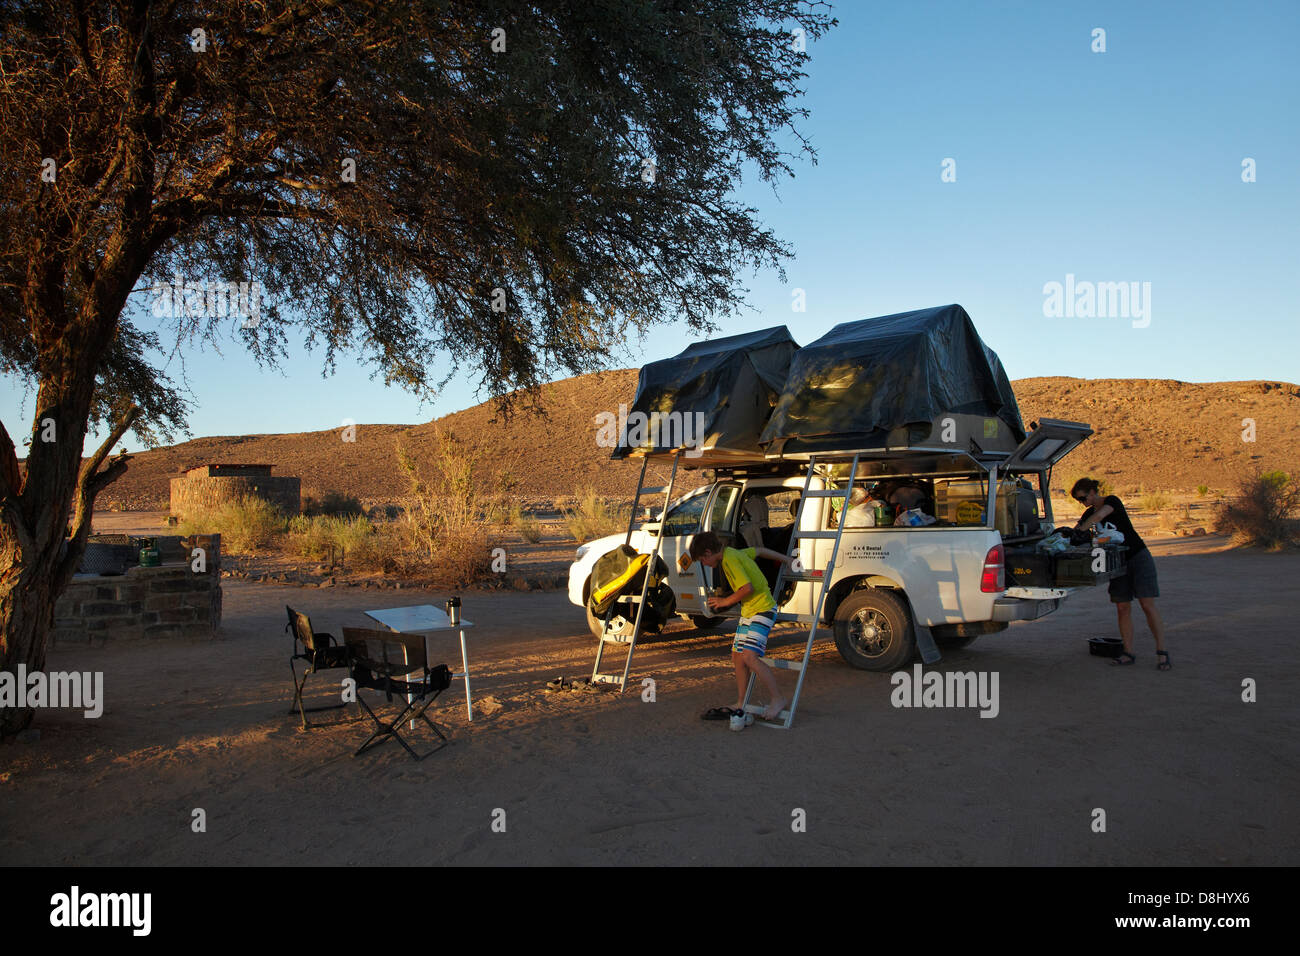 Toyota Hilux camper with roof tents, Canon Roadhouse campsite, near Fish River Canyon, Southern Namibia, Africa Stock Photo